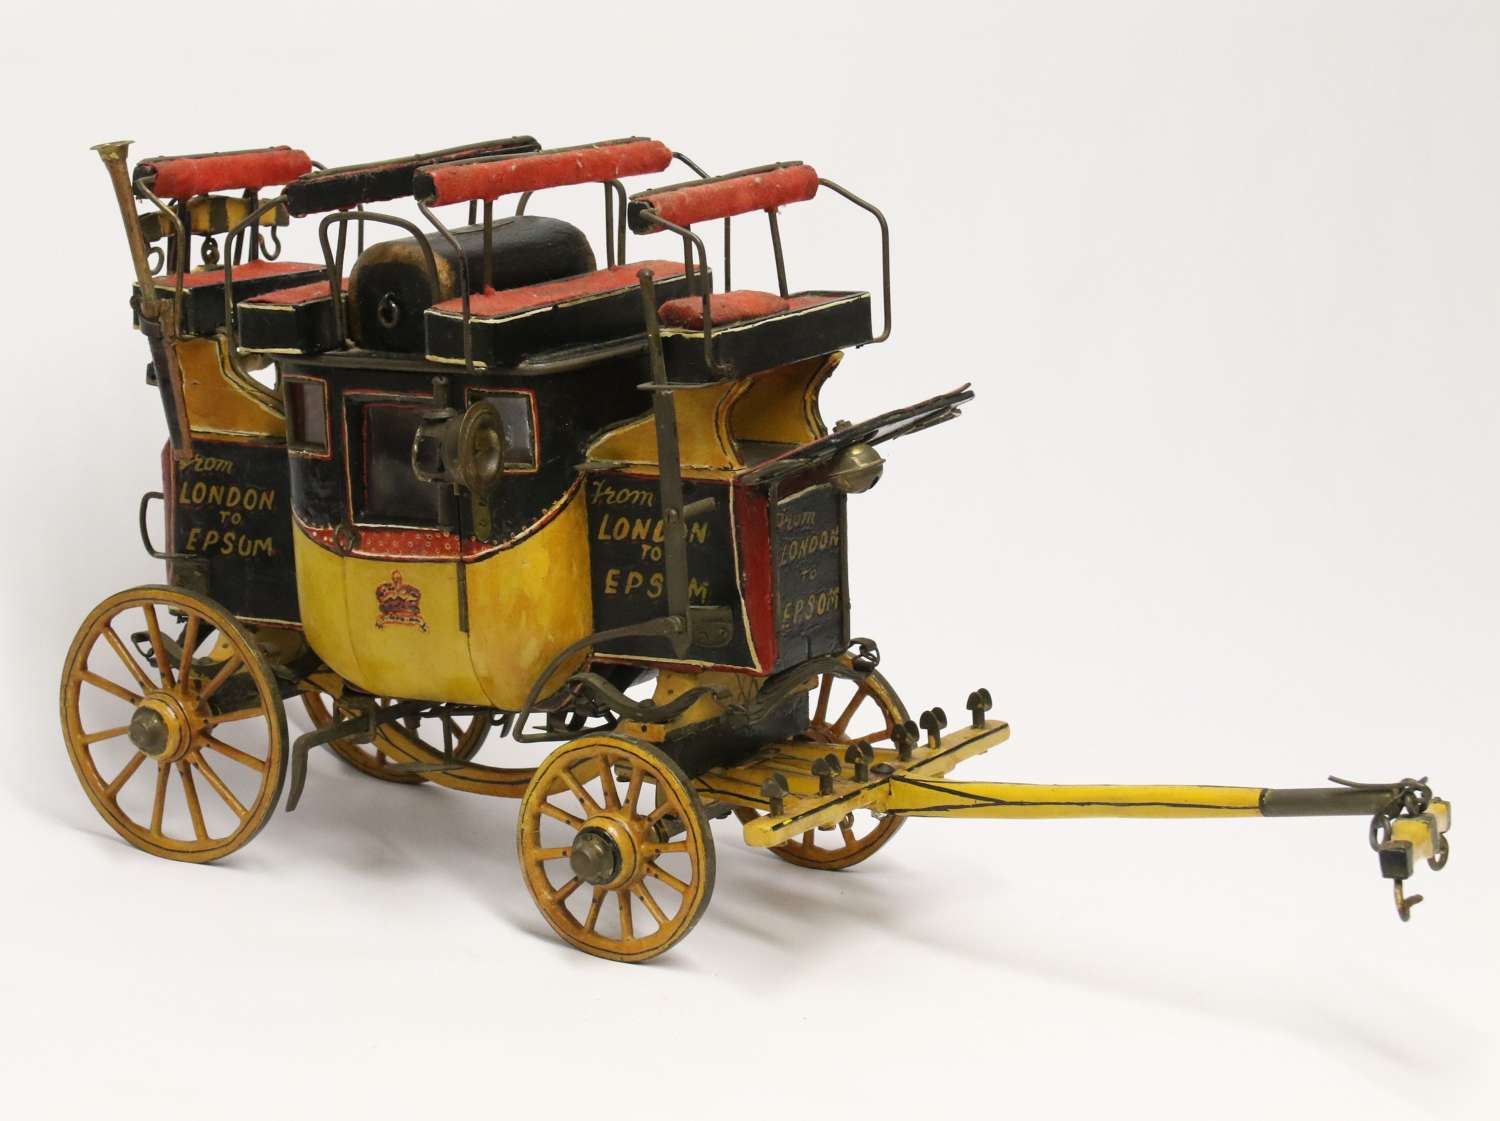 A rare Edwardian model of an 18th c London to Epsom Stagecoach